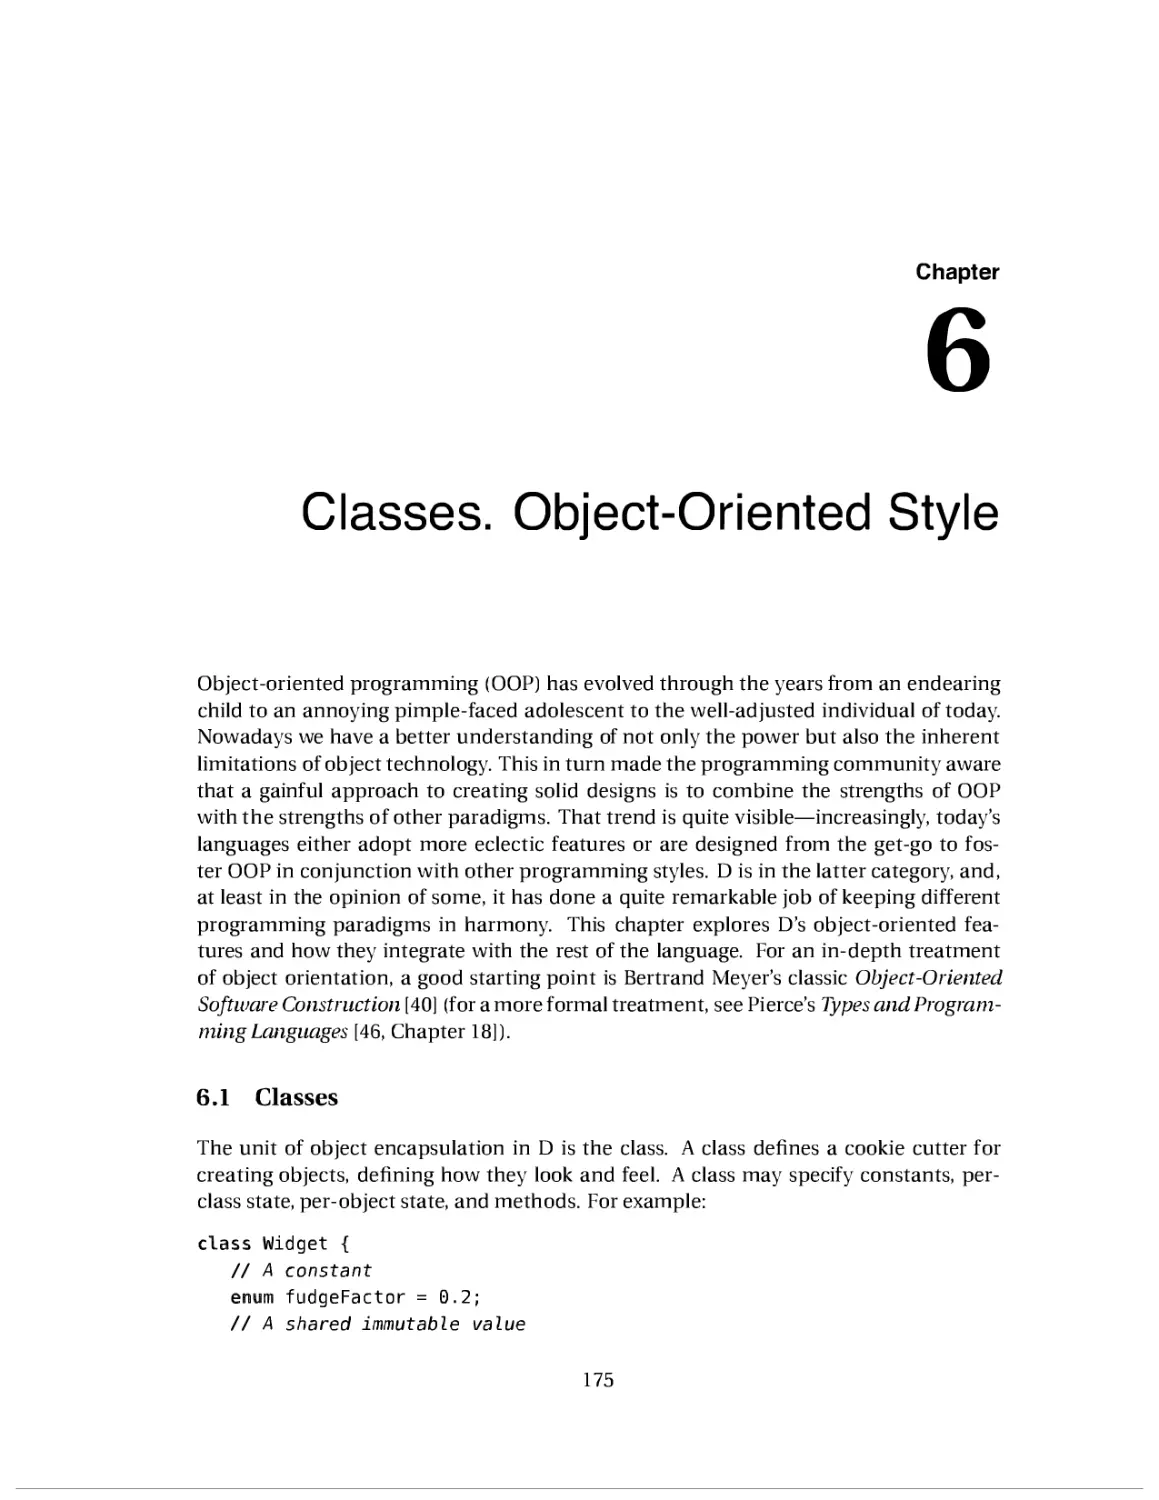 6. Classes. Object-Oriented Style